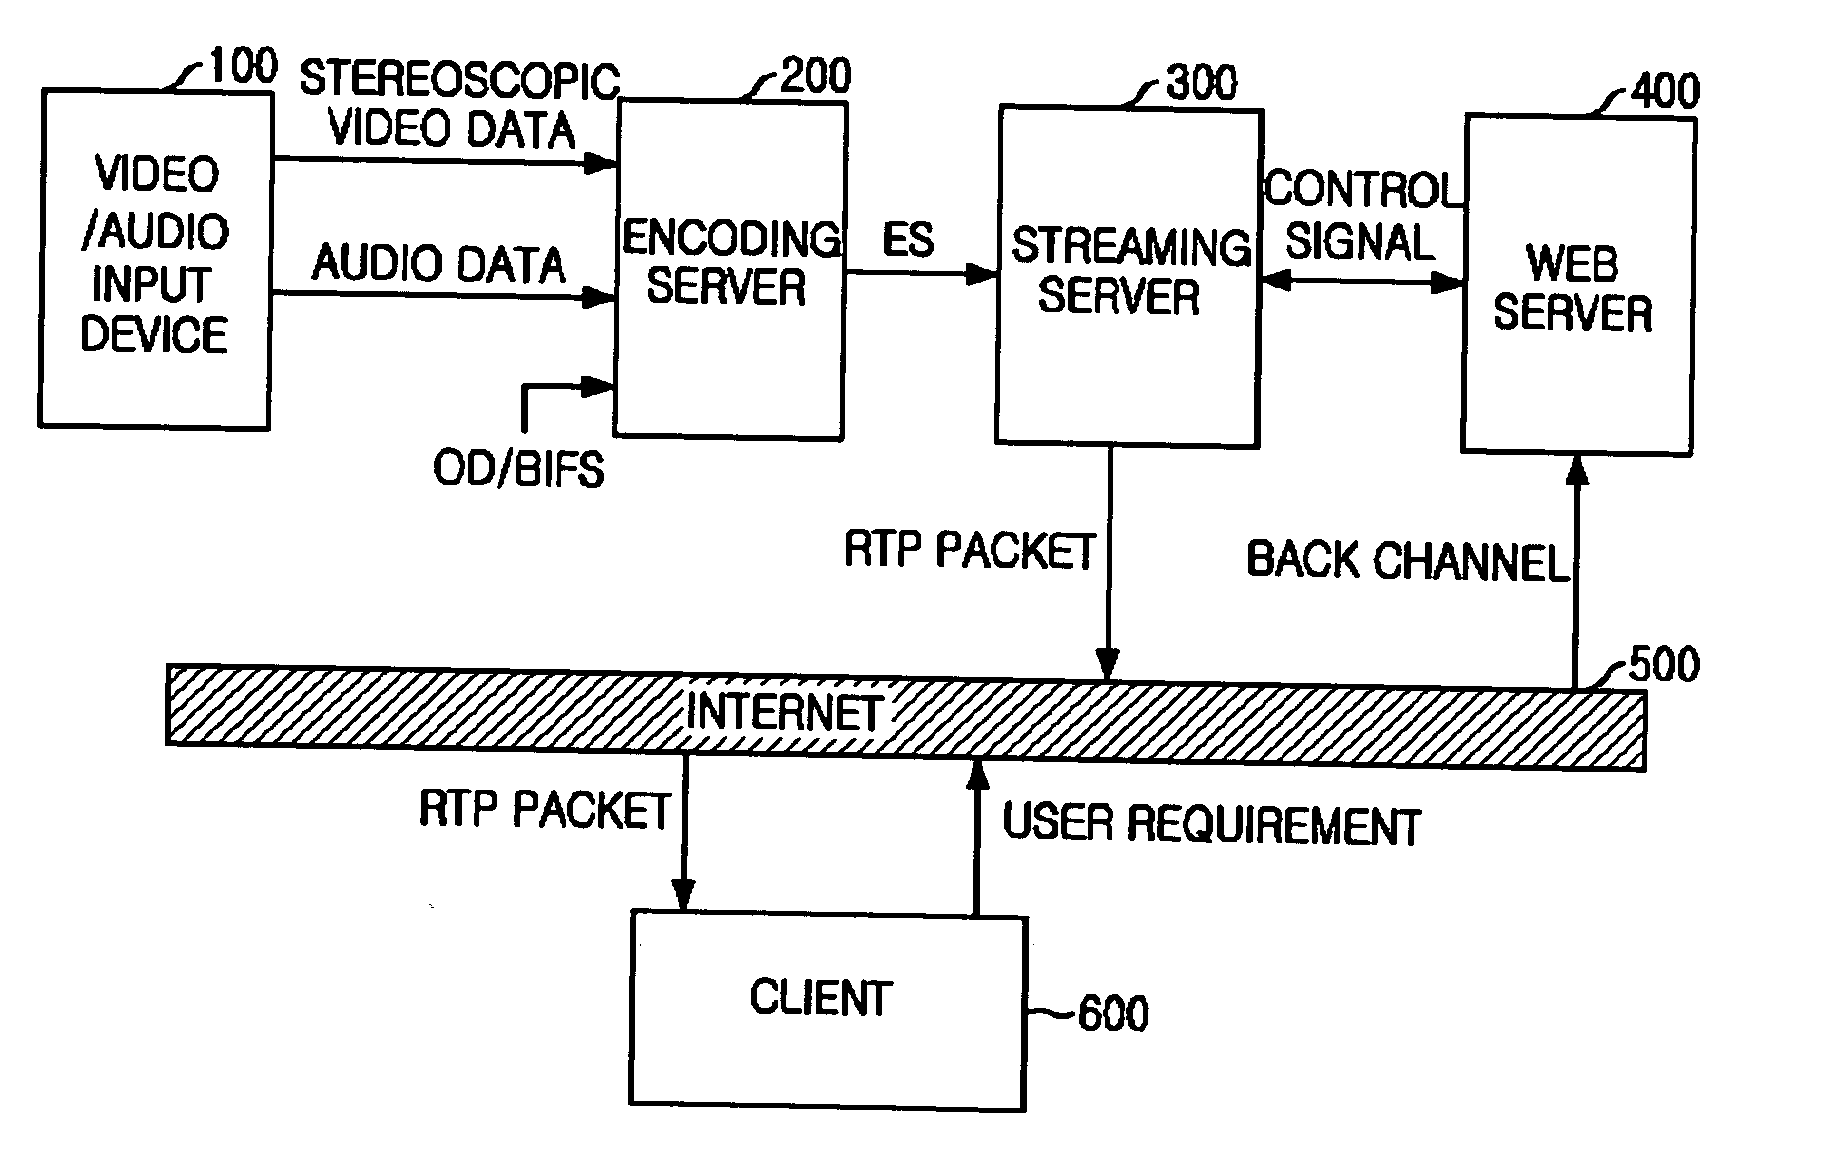 System and method for internet broadcasting of mpeg-4-based stereoscopic video